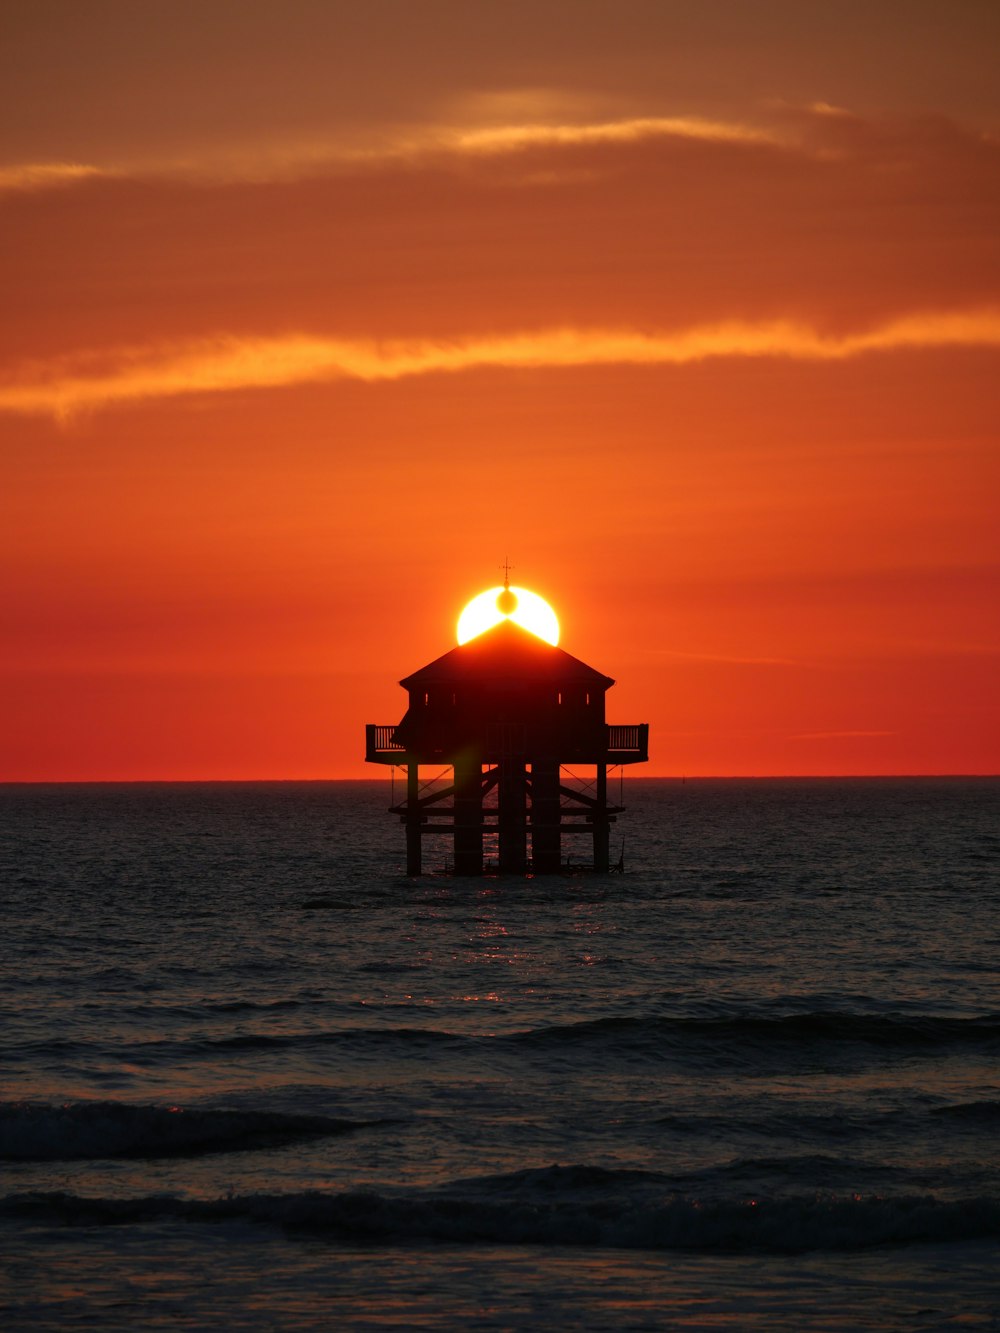 the sun is setting over the ocean with a small building in the foreground